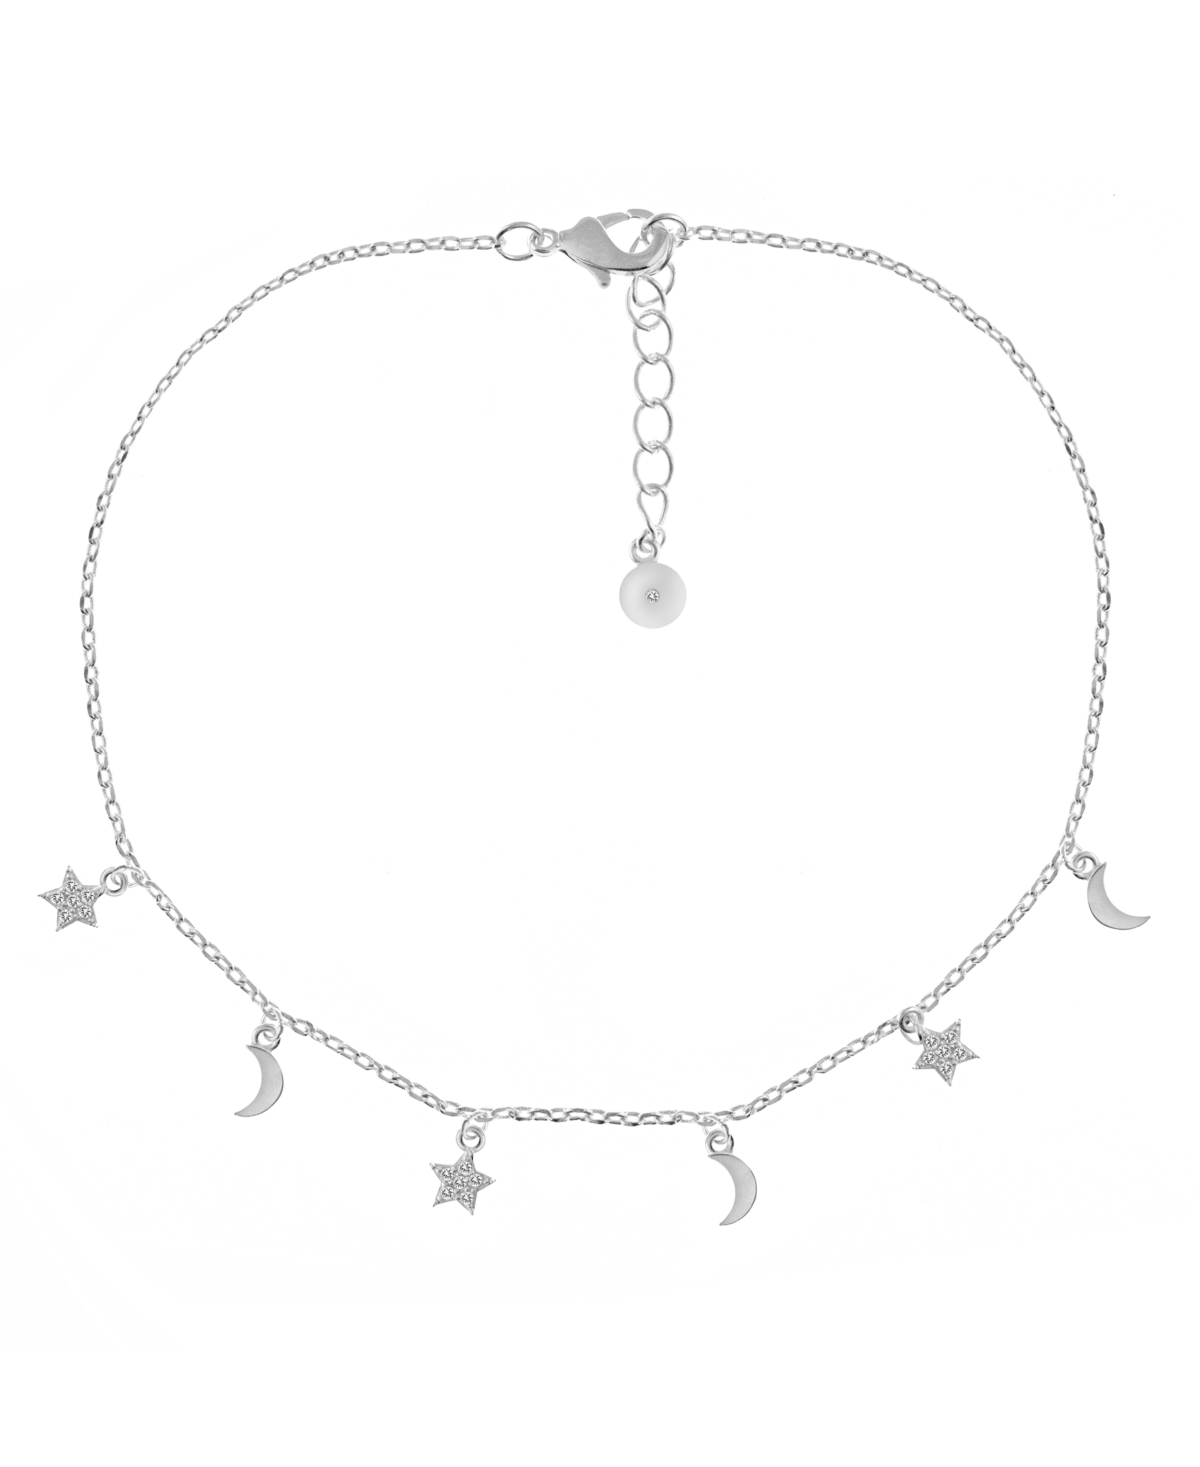 Clear Cubic Zirconia Moon & Star Anklet in Silver Plate - Silver